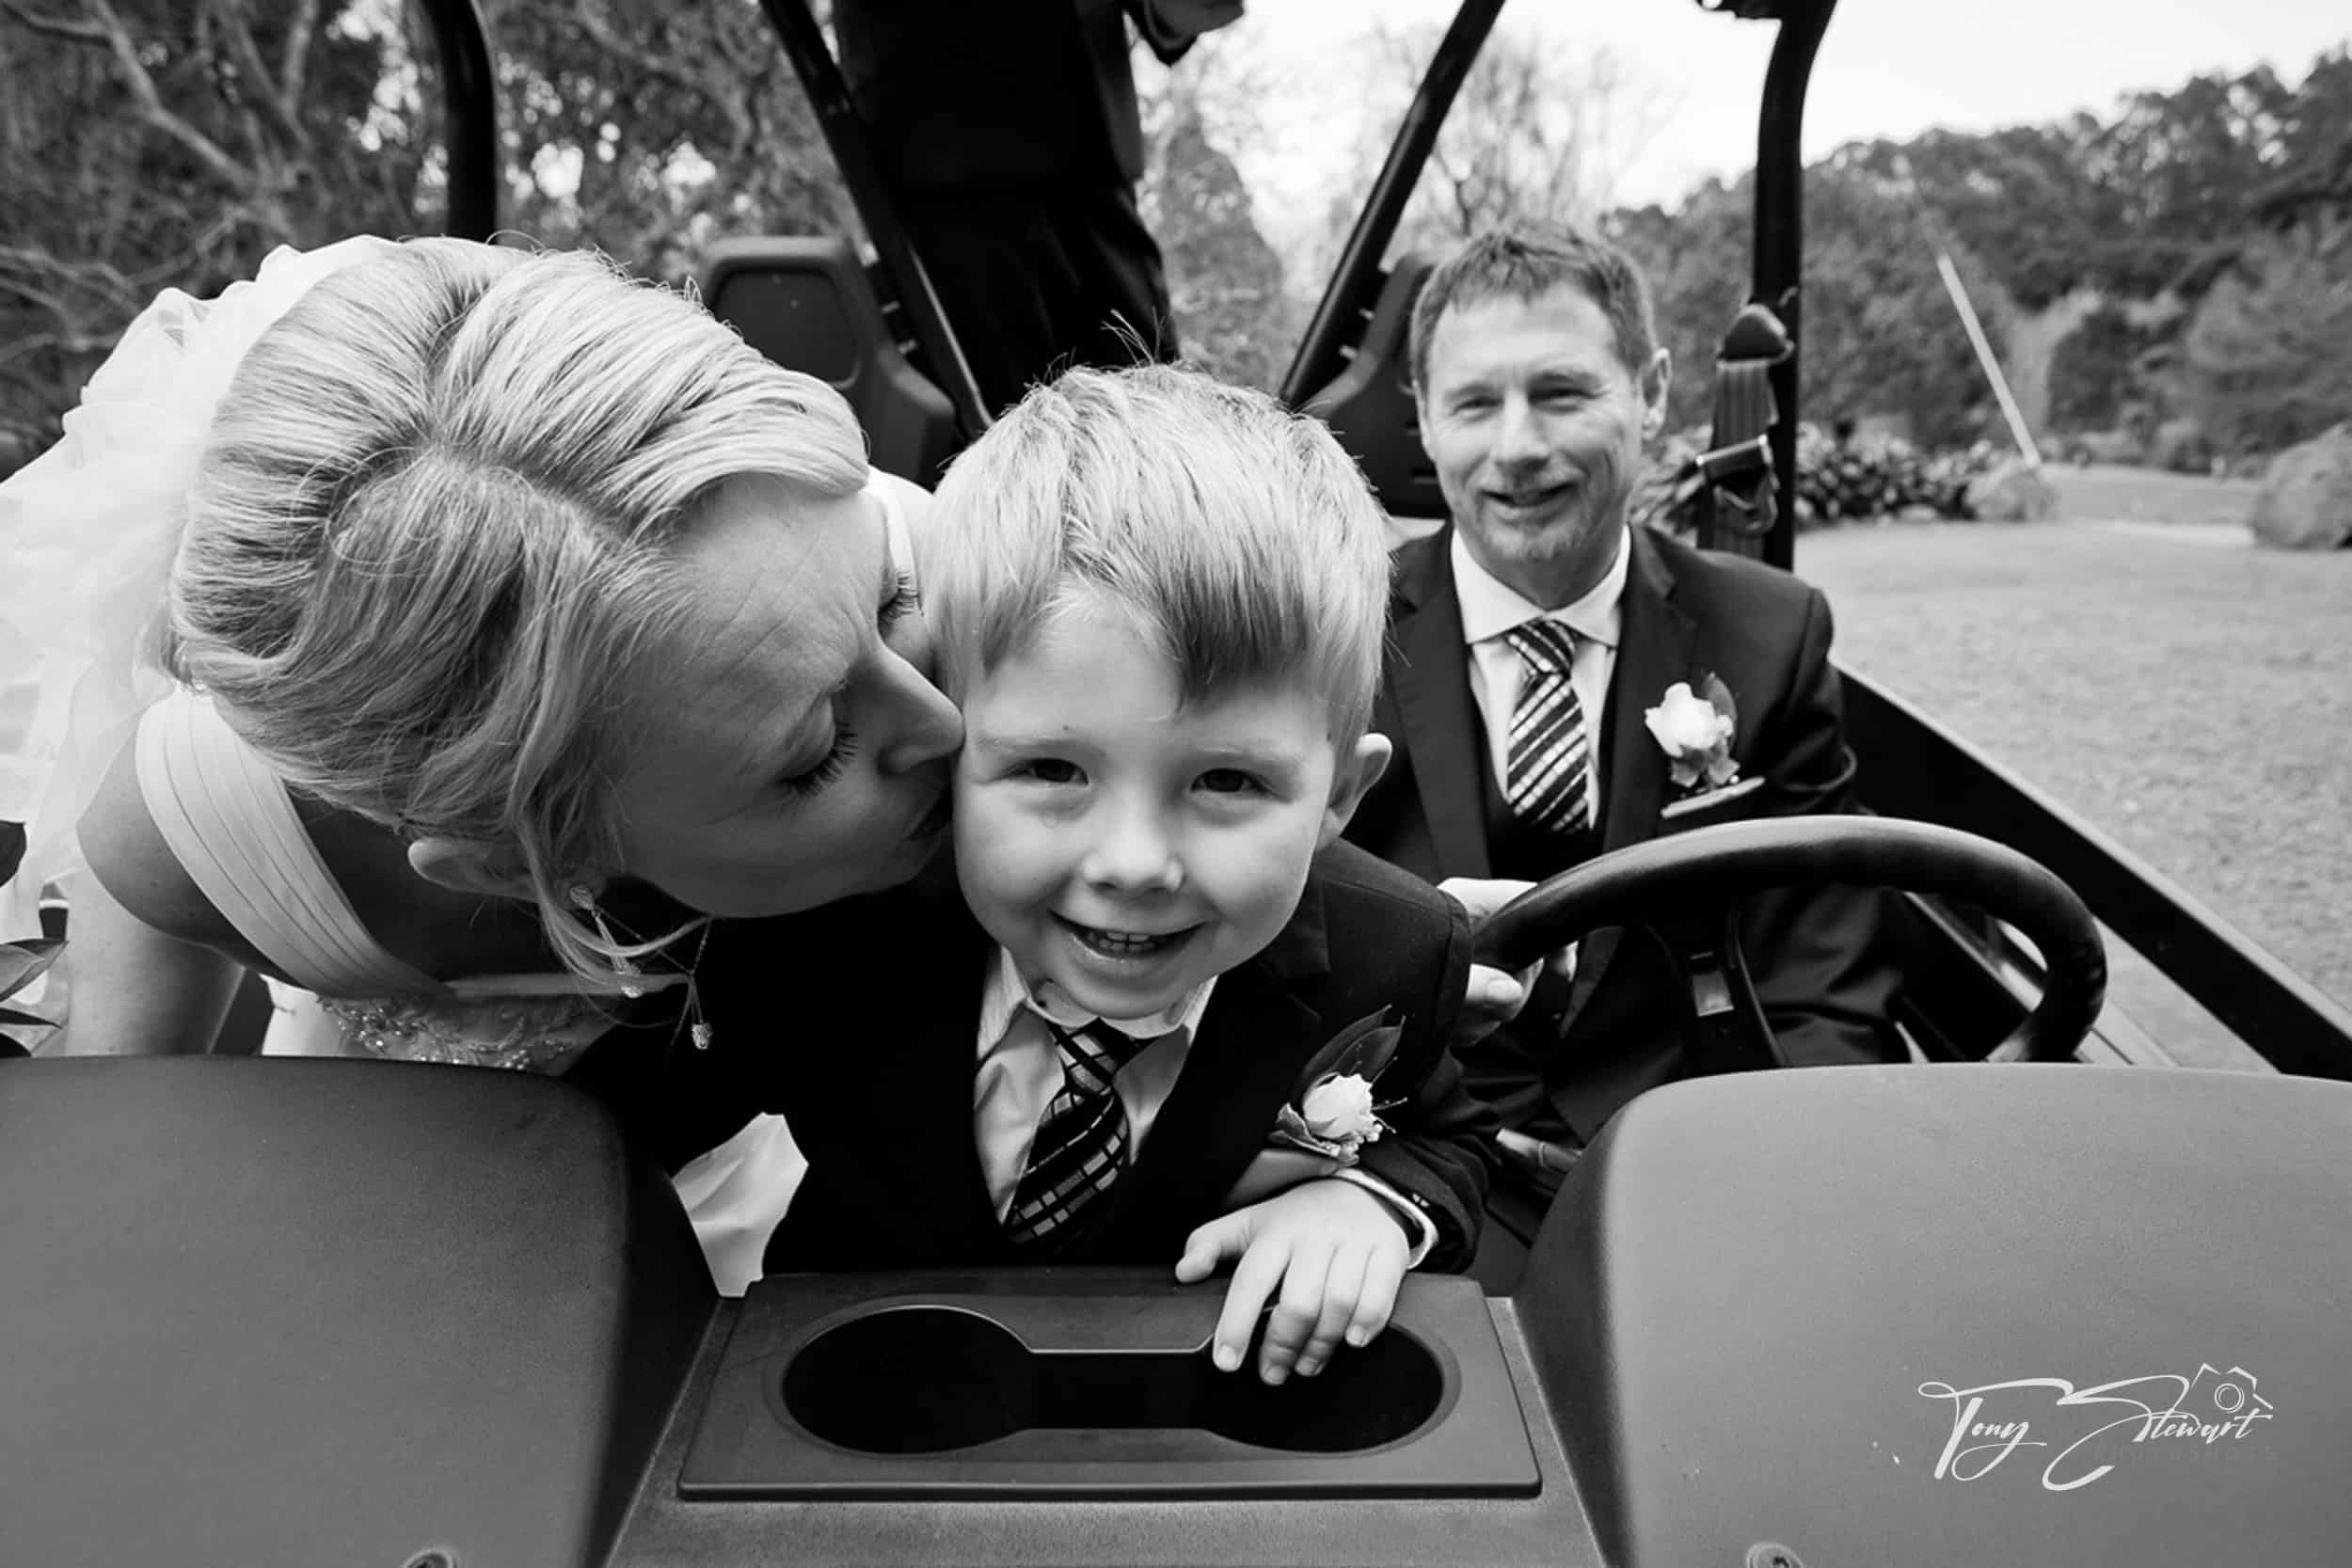 Son of bride gets kissed on cheek by his Mum, while his Dad drives a side by side at their wedding ceremony in Akaroa.